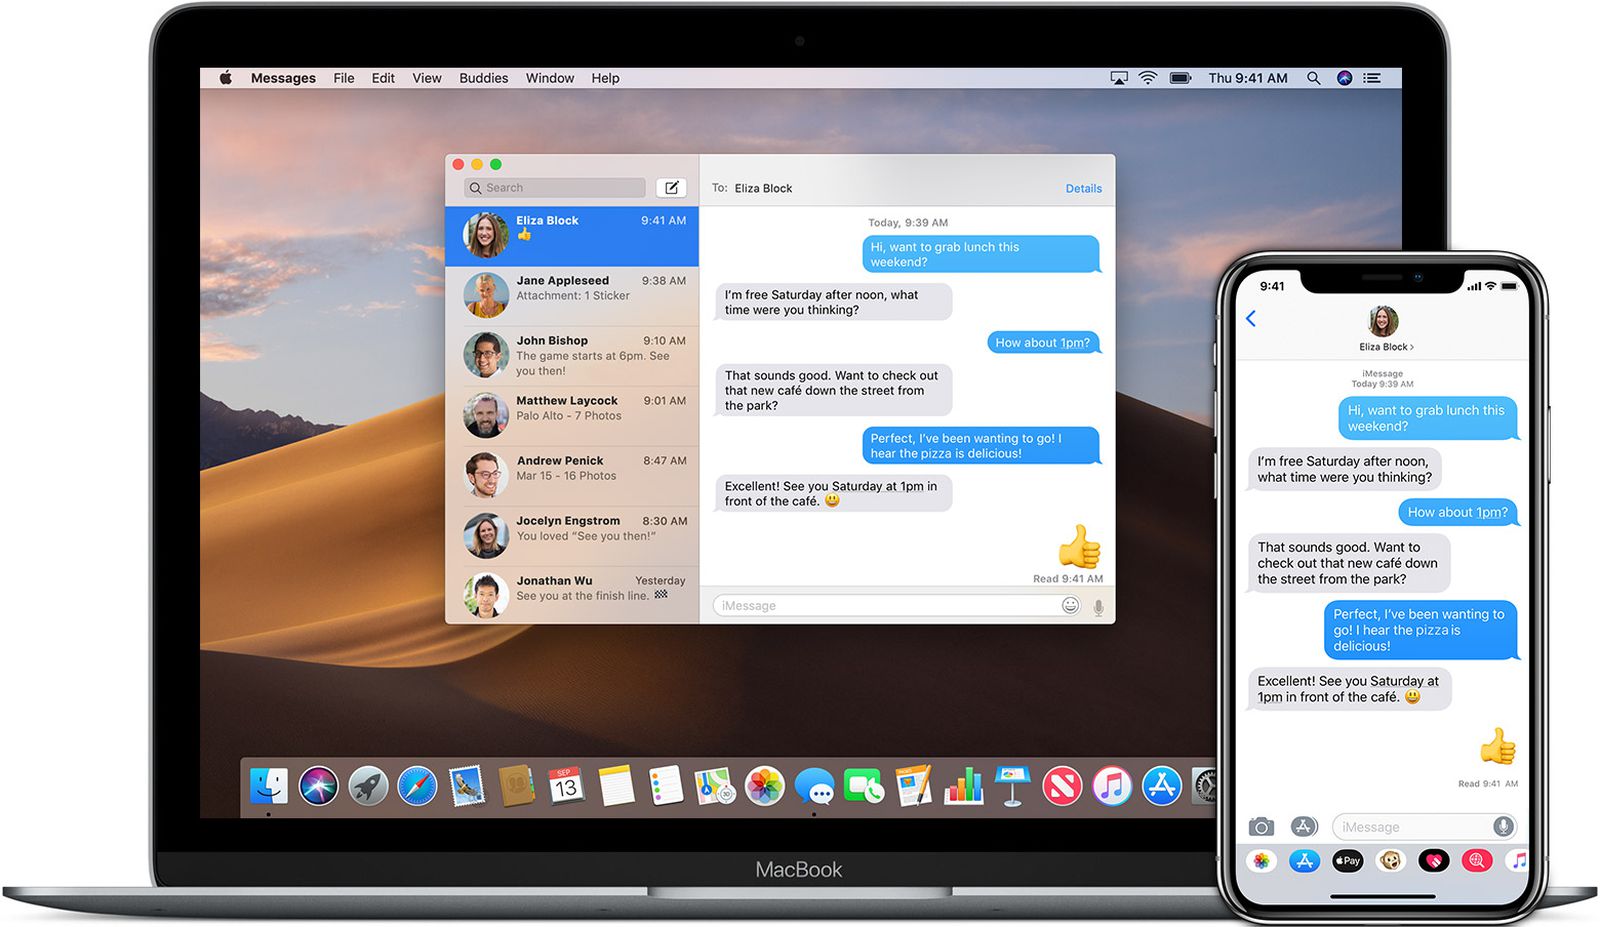 Download imessage history to pc